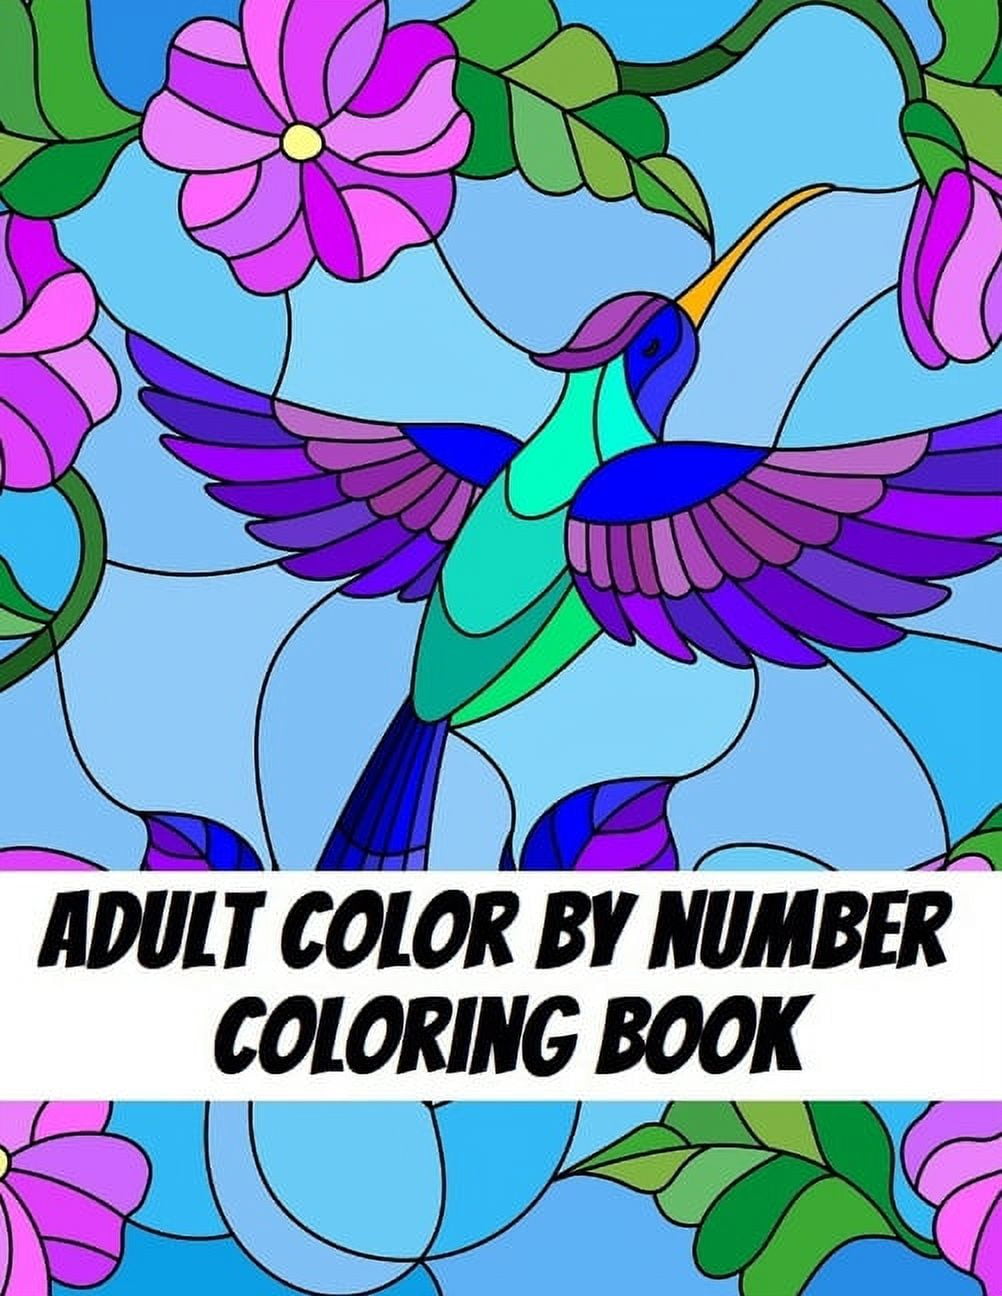 Color By Number Birds and Butterflies - Anti Anxiety Coloring Book